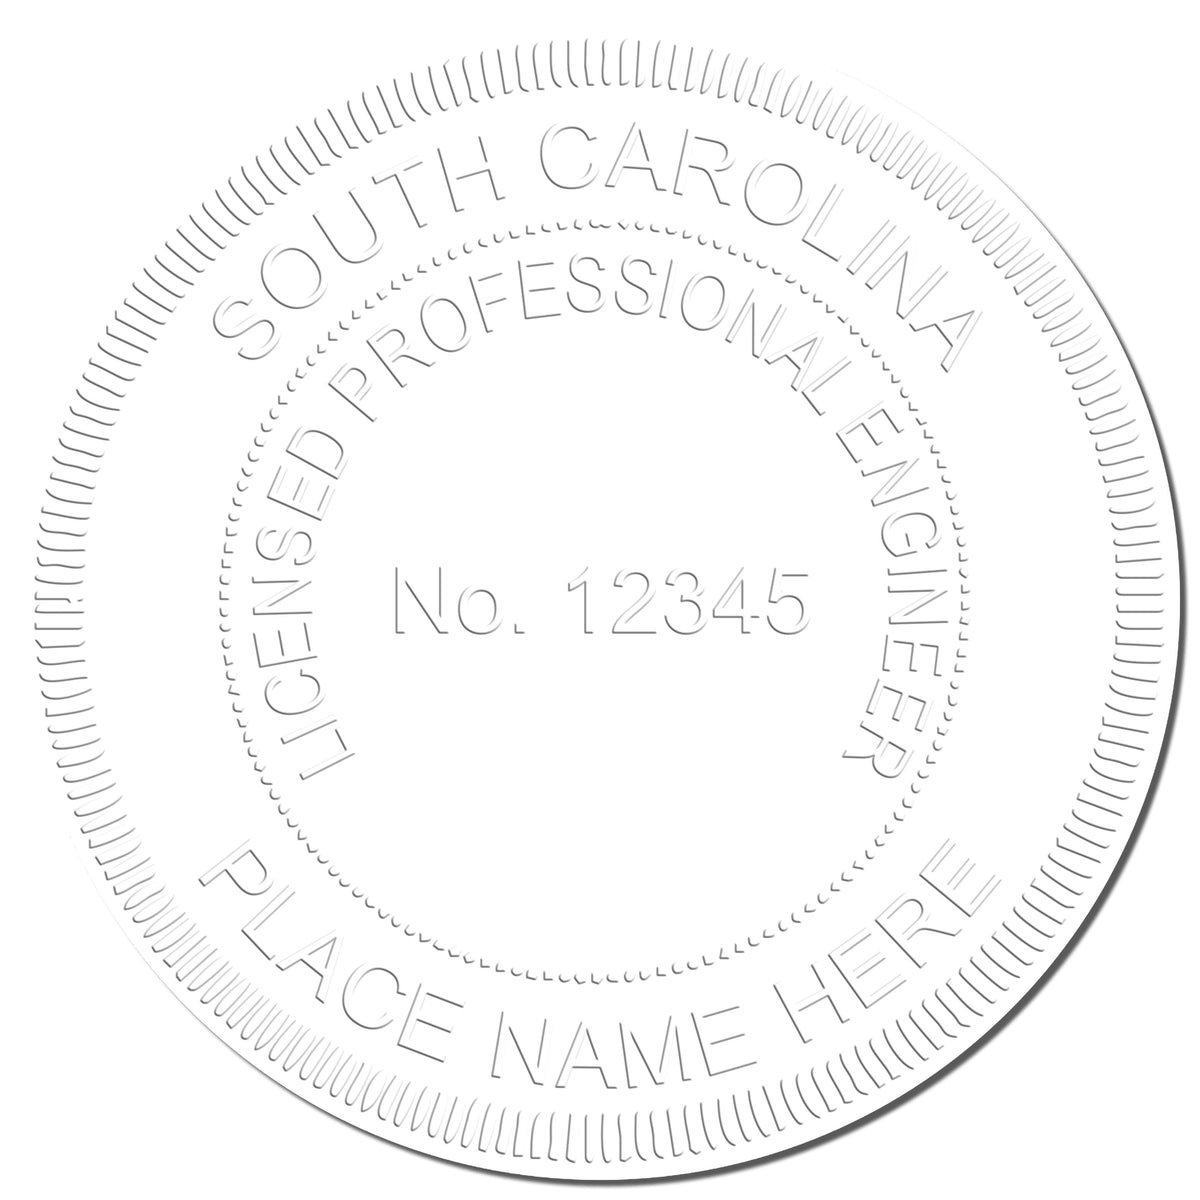 Another Example of a stamped impression of the South Carolina Engineer Desk Seal on a piece of office paper.